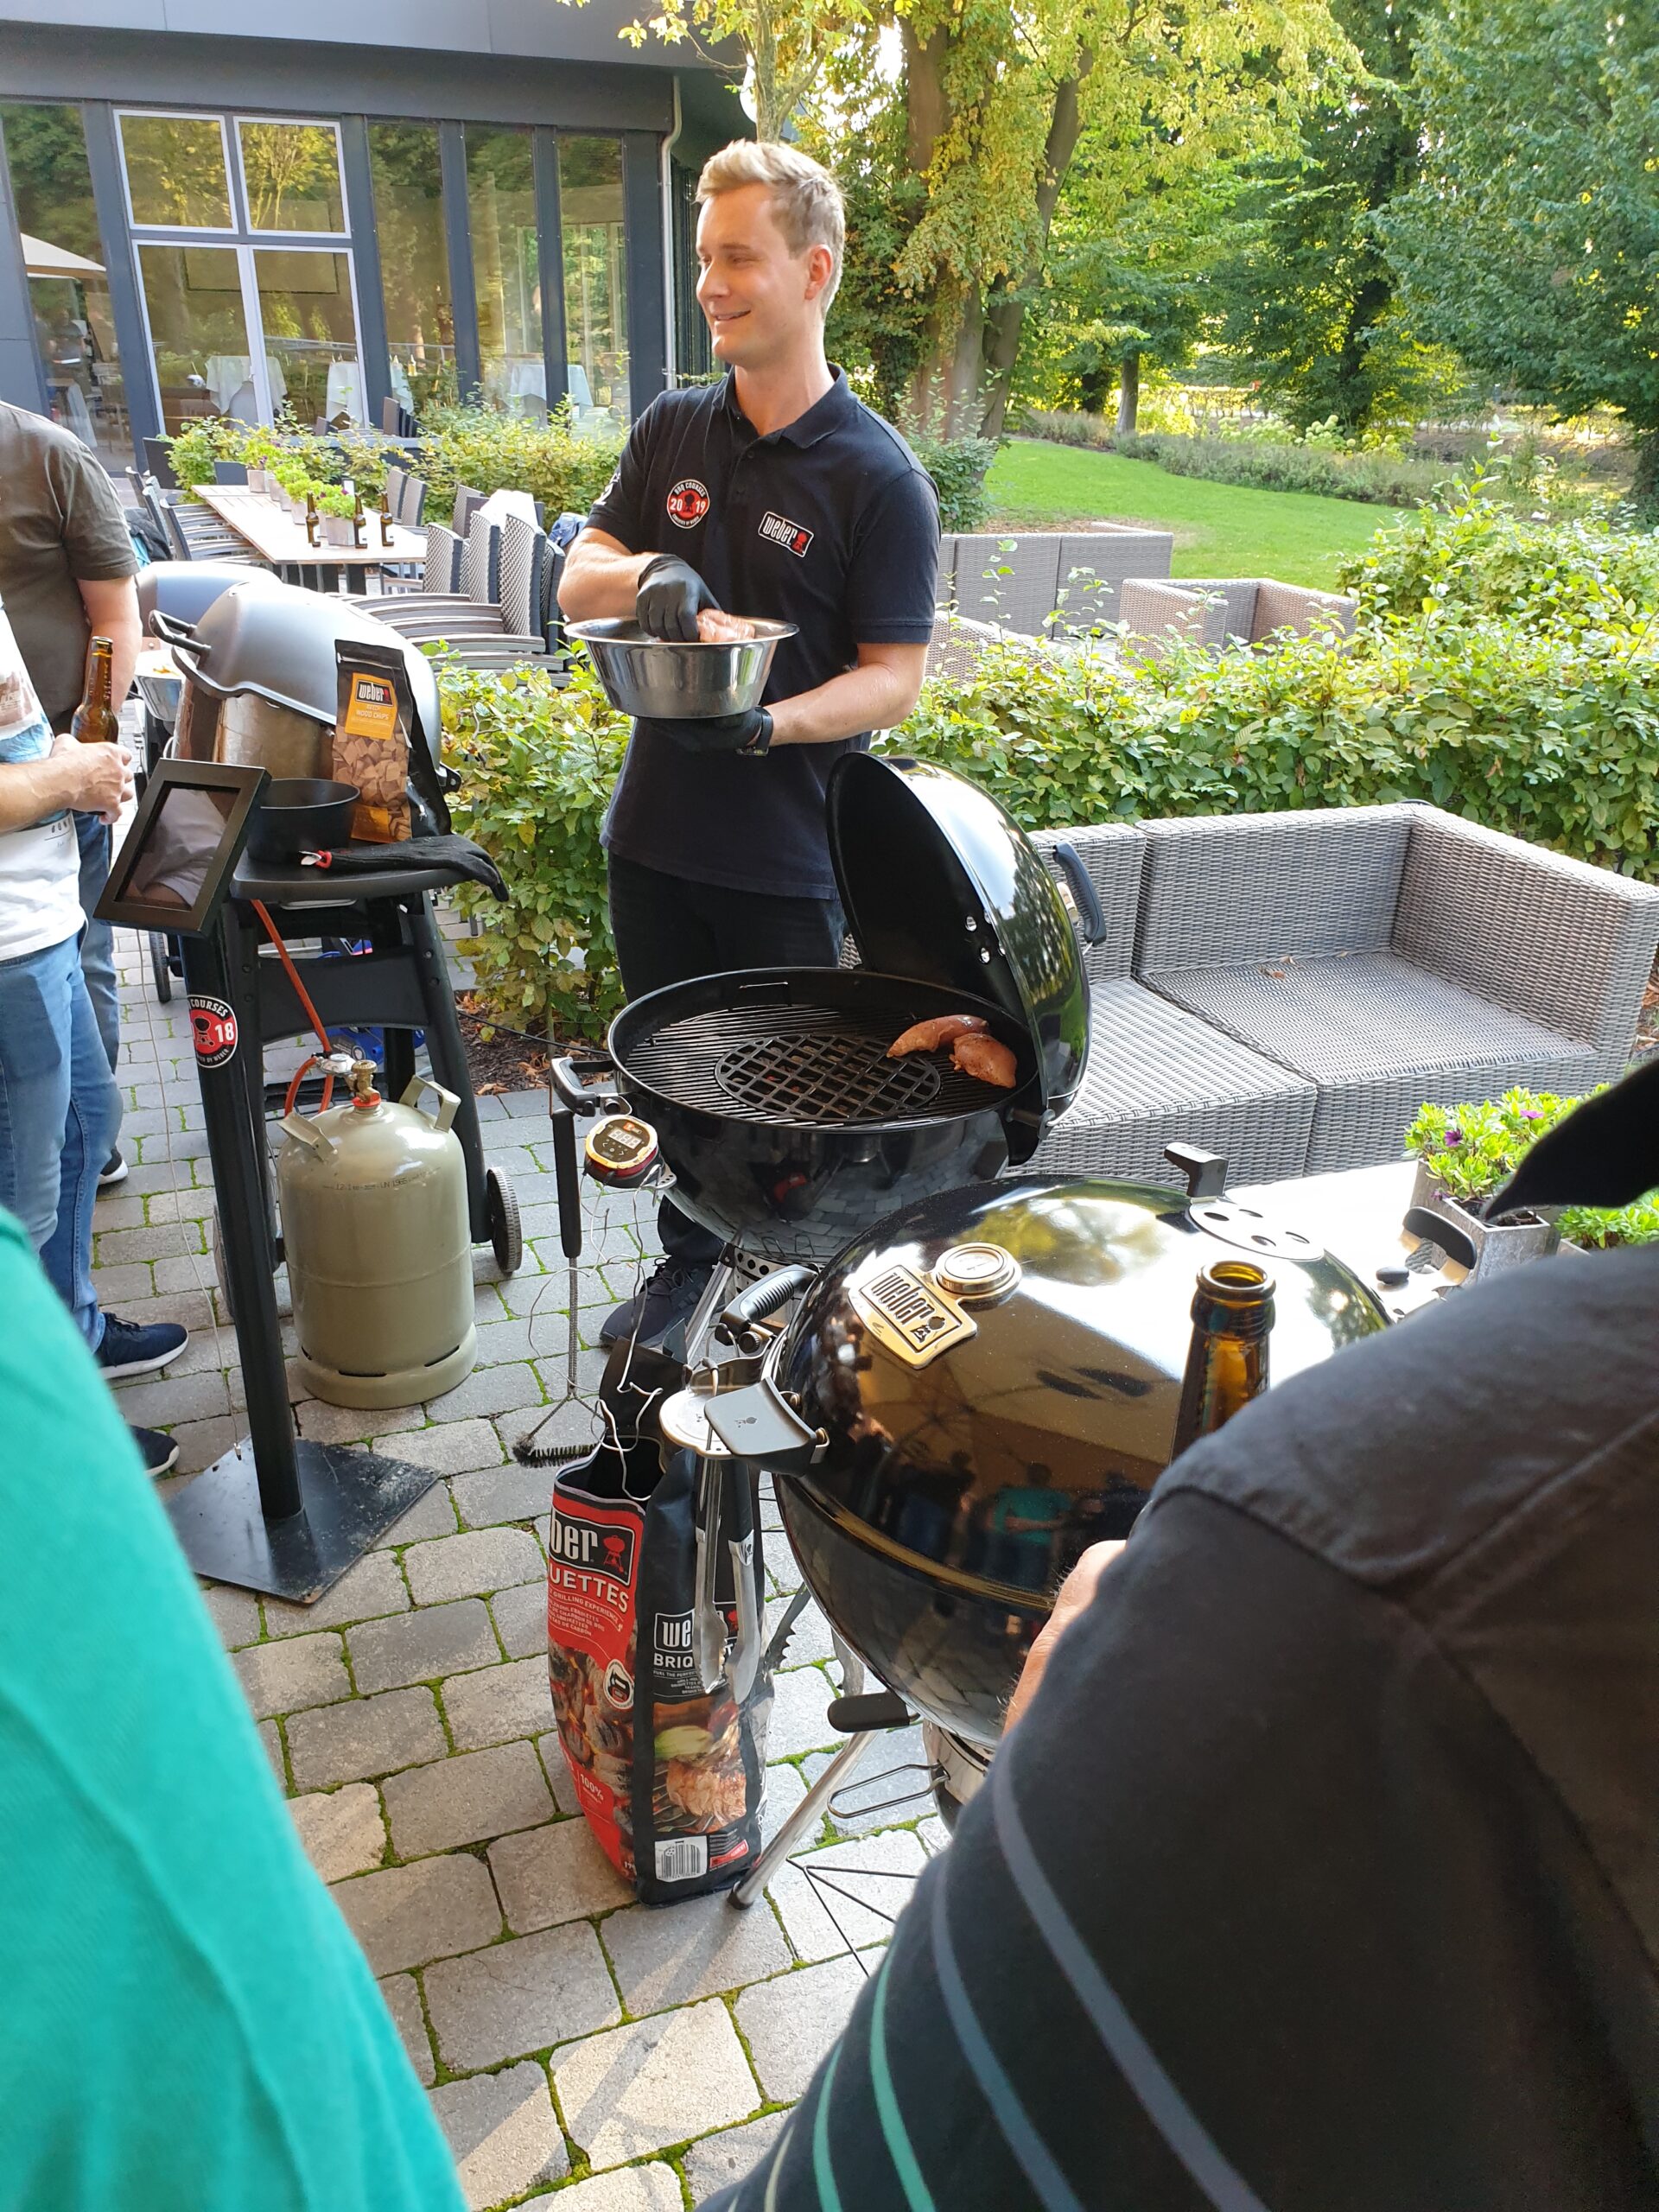 You are currently viewing Grillseminar USA” mit Markus Graevenbruck